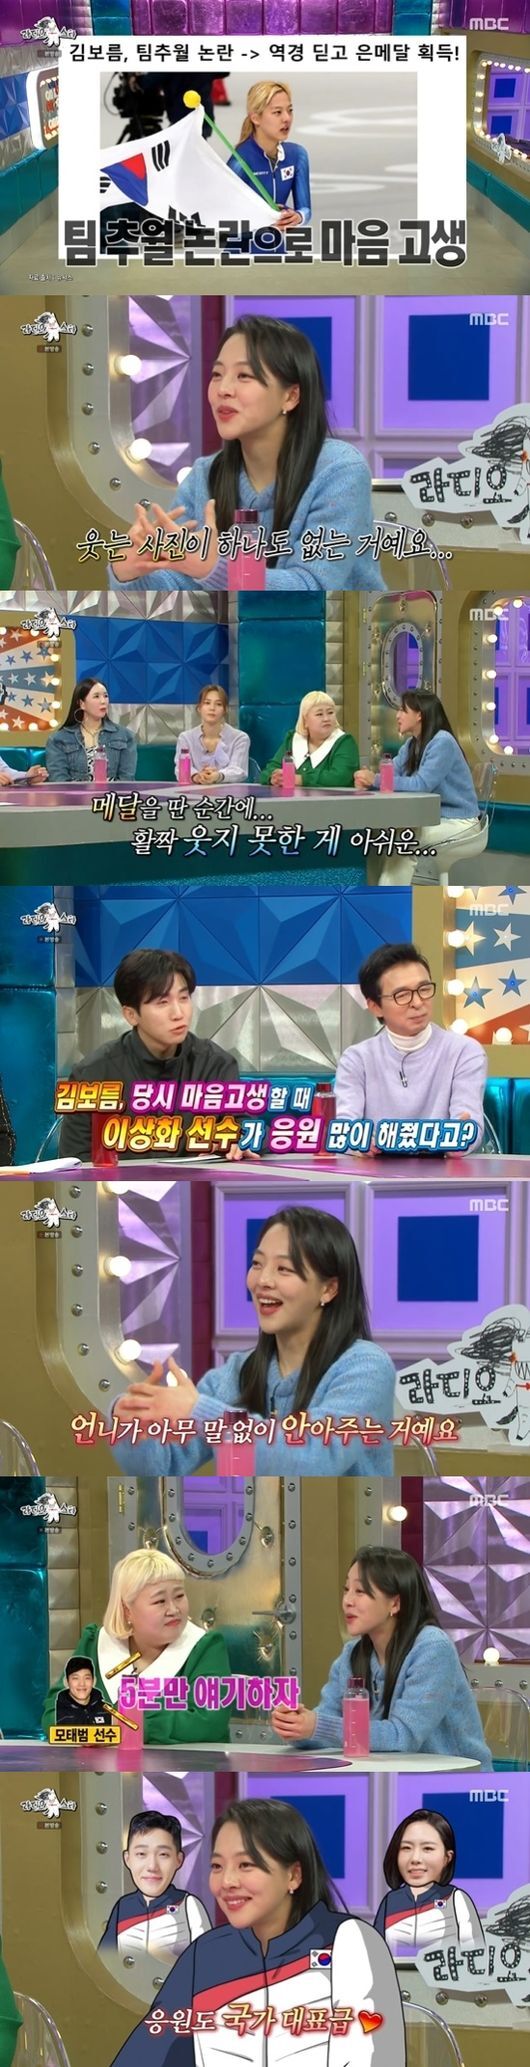 Kim Bo-reum thanked Lee Sang-hwa and Mo Tae-bum for being comforted at the time of the Olympic Games.MBC entertainment Radio Star broadcasted on the afternoon of the 15th was featured in Energy Jade featured by Jang Youngran, Ahn Hyun-mo, Hong Yoon Hwa and Kim Bo-reum.Kim Bo-reum, who played Olympic Games three times in a row to Sochi, Beijing and Pyeongchang, picked PyeongChang Olympic Games silver medal as the most disappointing Olympic Games.2018 PyeongChang Winter Olympics Speed skating at the 2010 Winter Olympics  ⁇  M 8th Kyonggi At the time, Kim Bo-reum and Park Ji-woo crossed the finish line far ahead of the last runner,Kim Bo-reum said, This is the moment I achieved my dream at the Olympic Games by winning the silver medal, but I dont have any pictures of me smiling because of Kyonggi right before. Its a pity that I played that part a bit.At that time, my roommate Lee Sang-hwa cheered me up. I did not come out of the room and came out to go to the bathroom, but my sister was there. I looked at each other for three seconds and my sister hugged me without saying anything.I felt like I did not have to say a little at that time. Taebum also said, Lets talk for five minutes because Im not eating rice. He said, Lets talk for five minutes now and then laugh like before. My colleagues around me also helped me a lot when I was in Pyeongchang. Radio Star broadcast screen capture